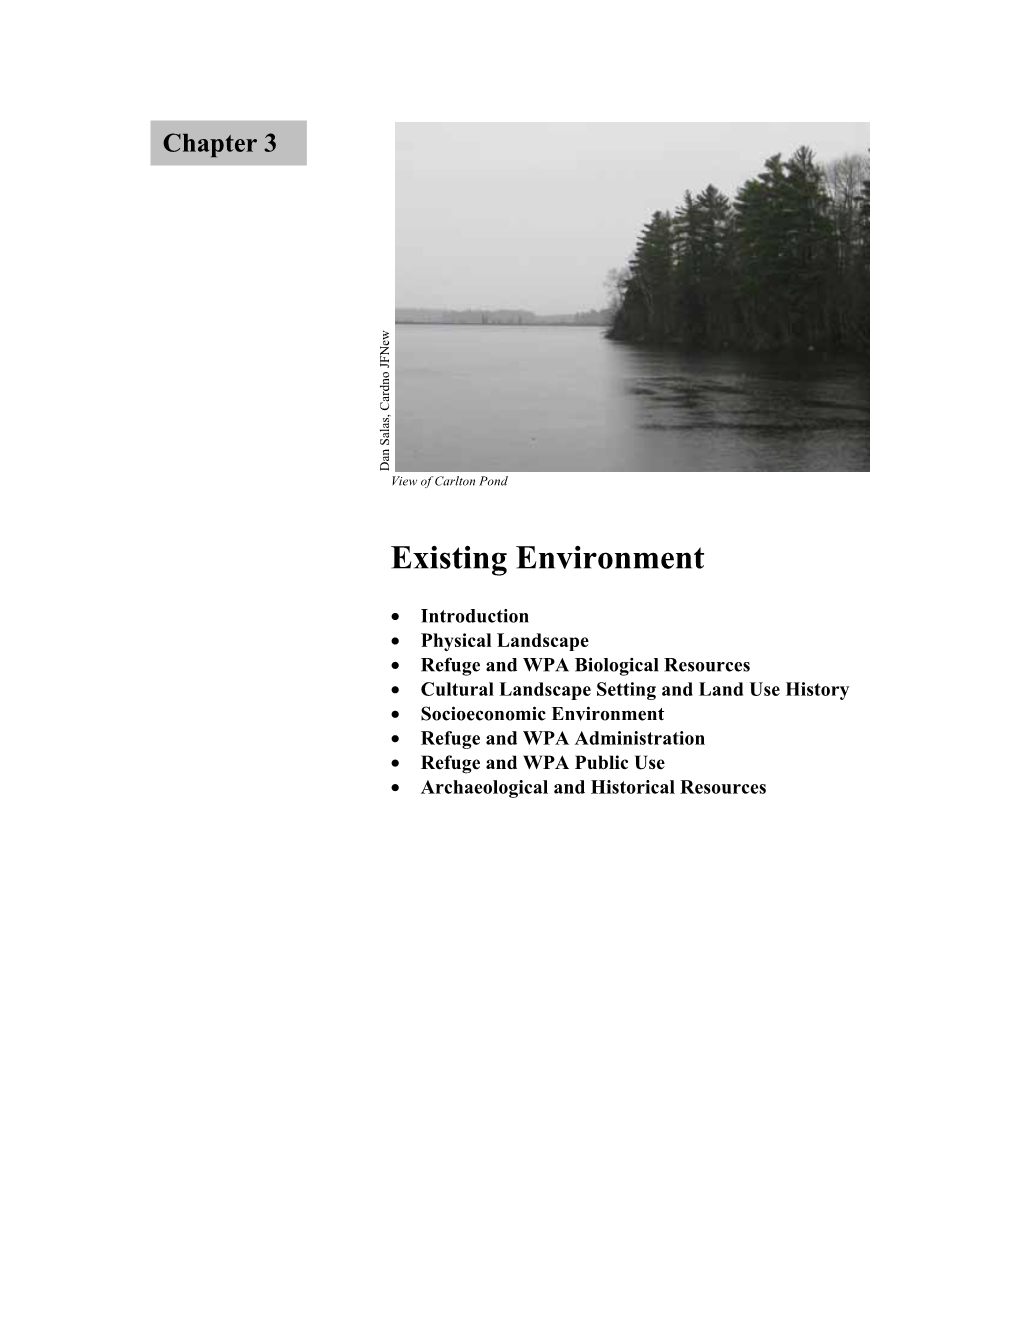 Chapter 3 Existing Environment